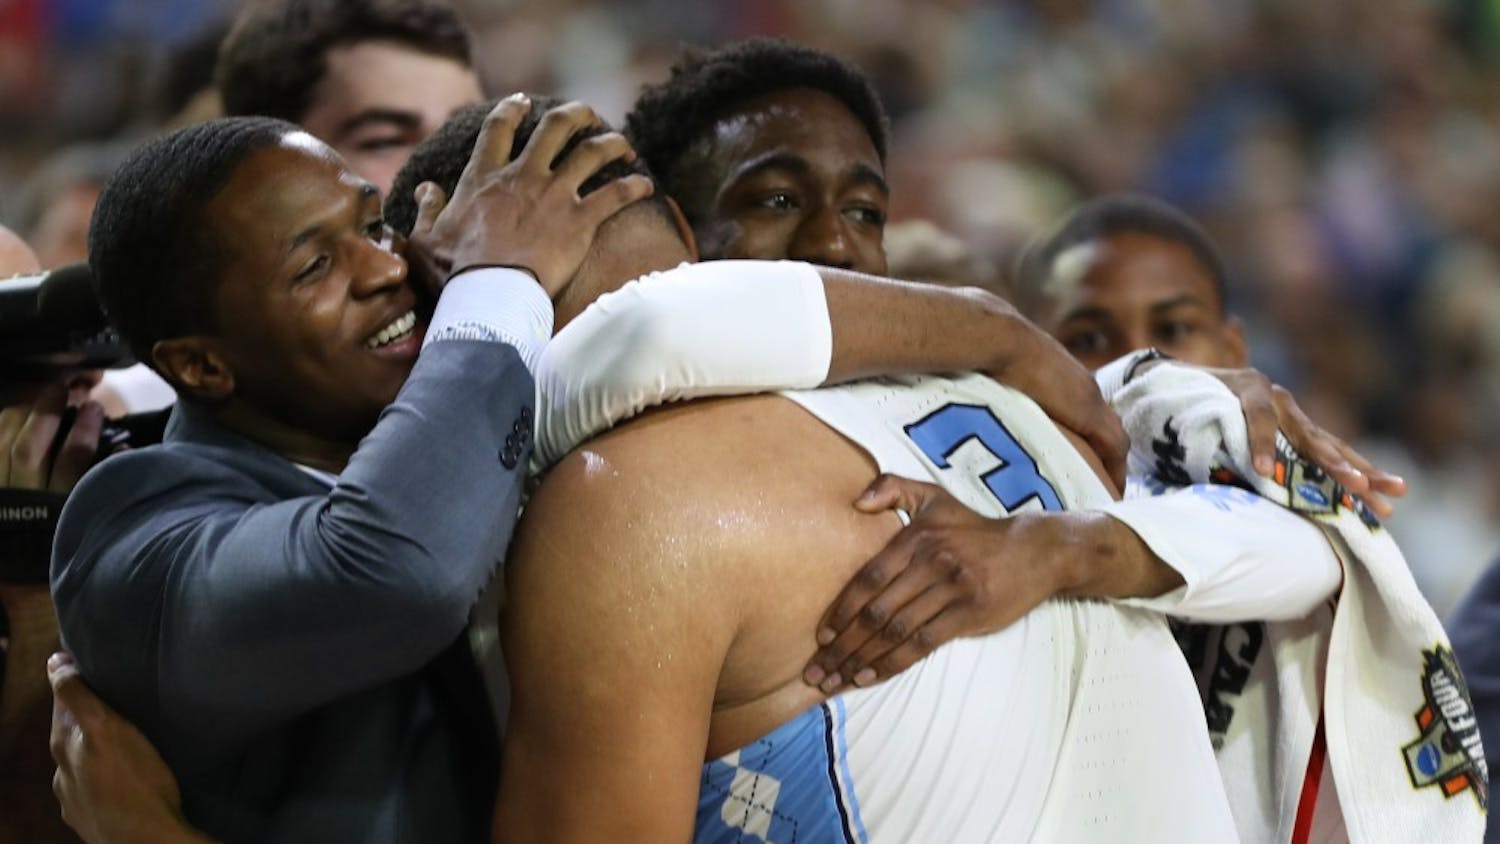 North Carolina forward Kennedy Meeks (3) is embraced by guards Kenny Williams and Brandon Robinson after recording 25 points and 14 rebounds against Oregon in the teams' Final Four matchup on Saturday in Phoenix.